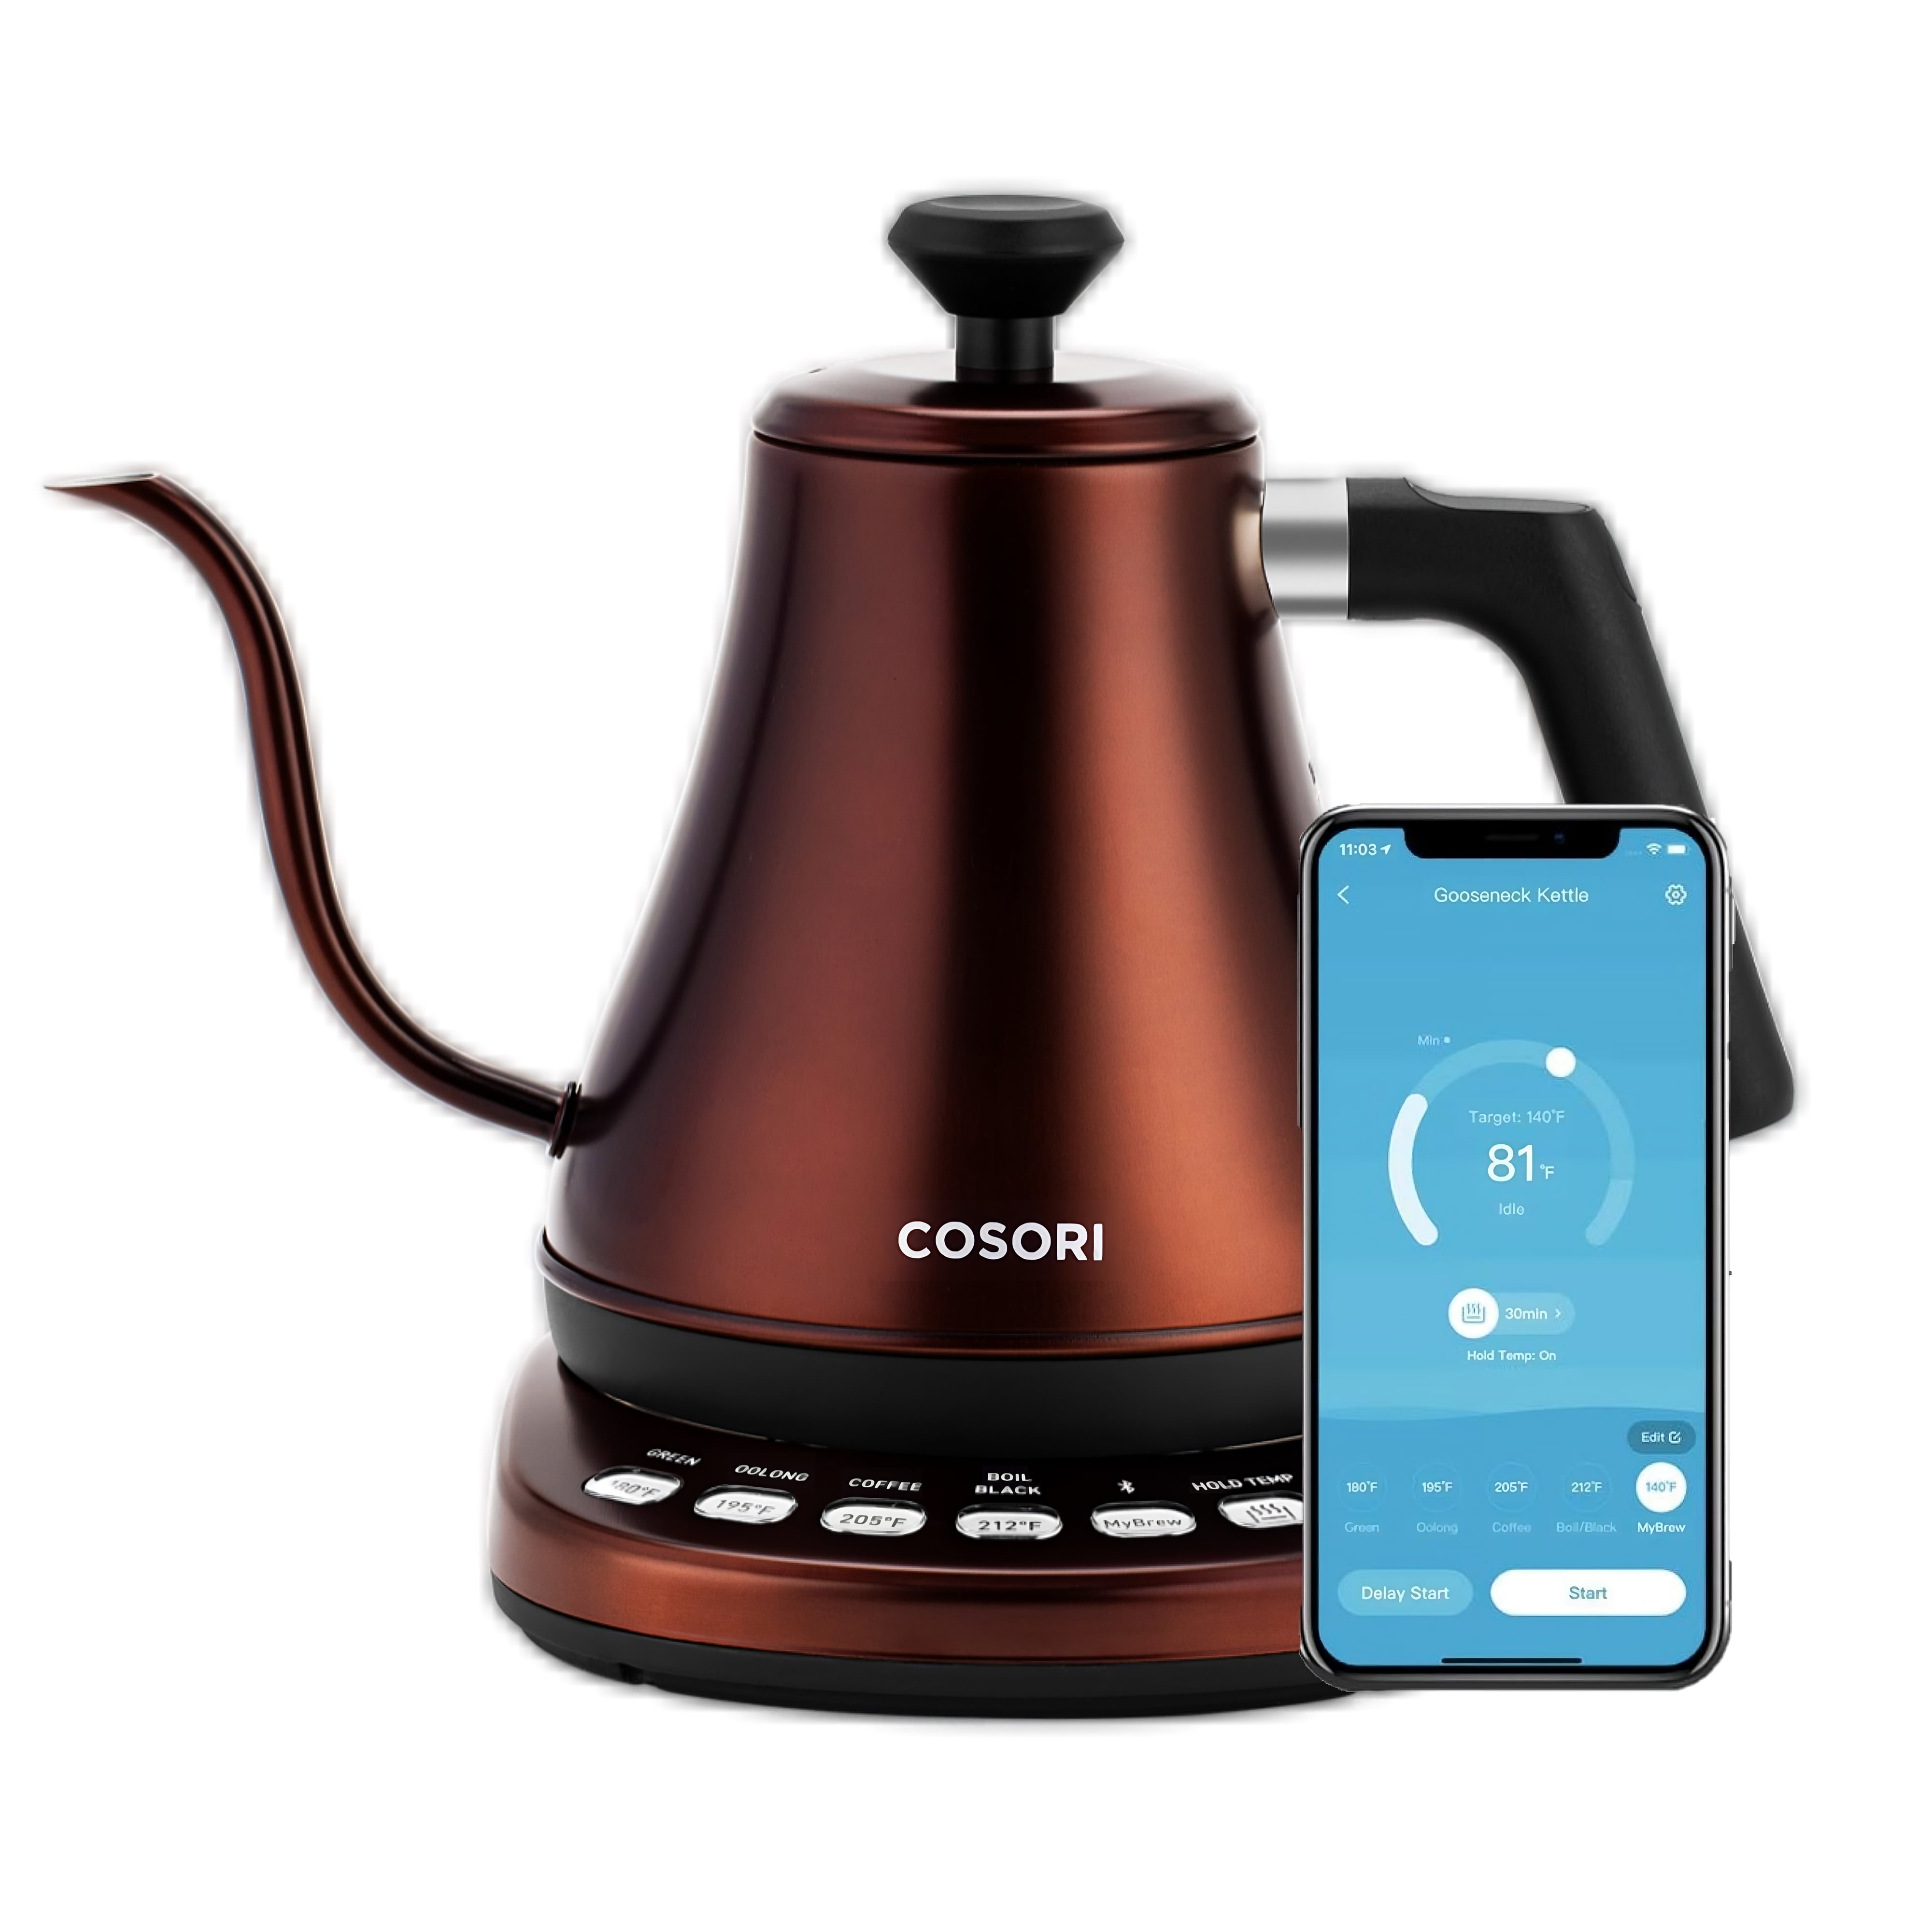 COSORI's Gooseneck Bluetooth Kettle with smartphone control hits  low  at $64.50